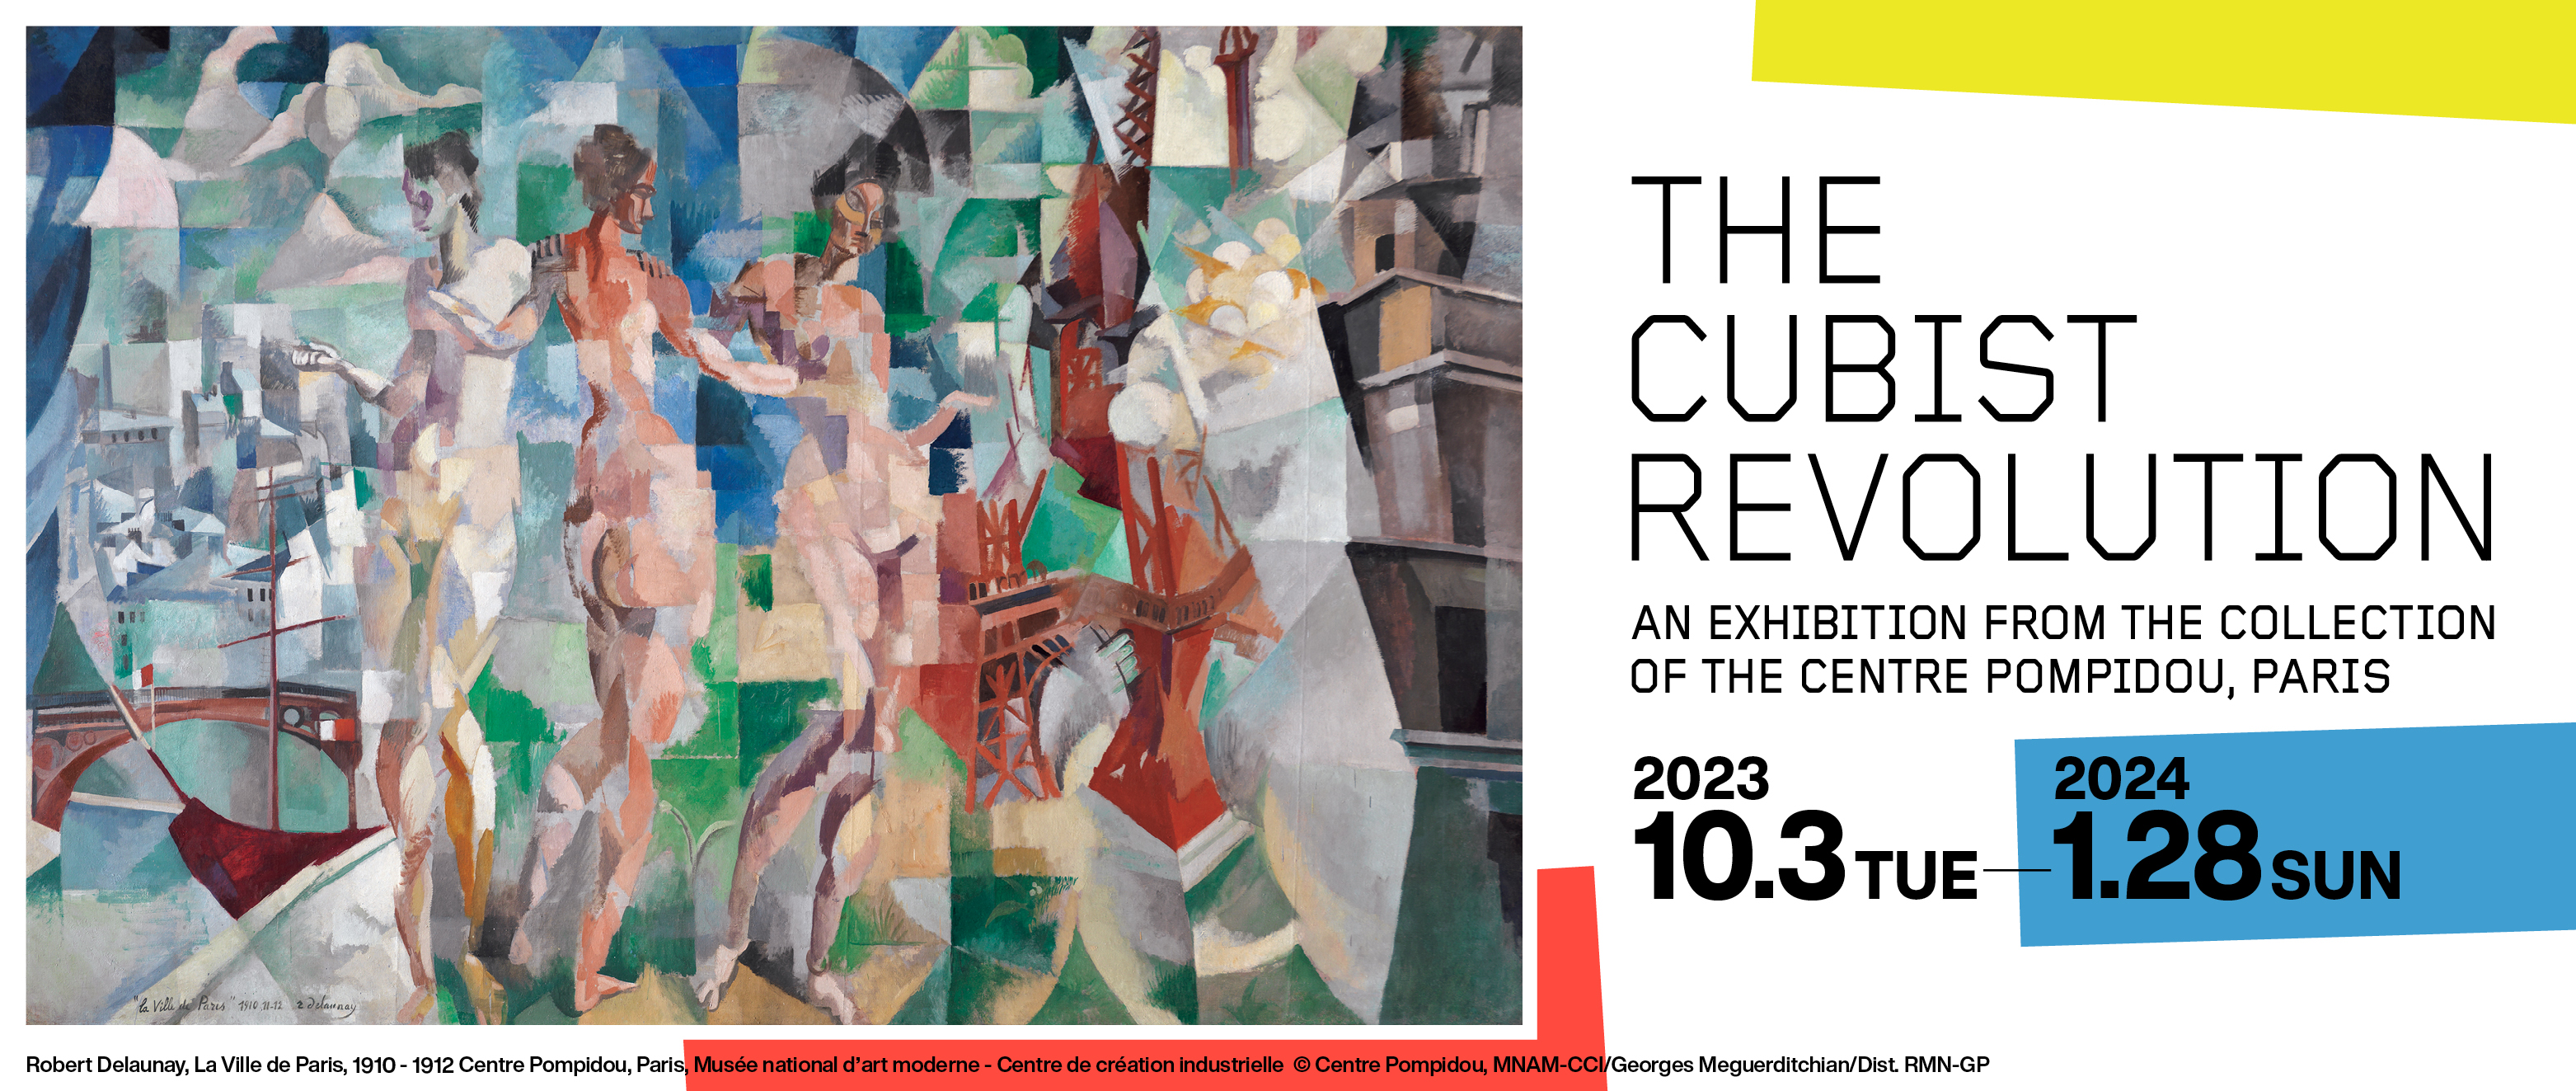 The Cubist Revolution An Exhibition from the Collection of the Centre Pompidou, Paris